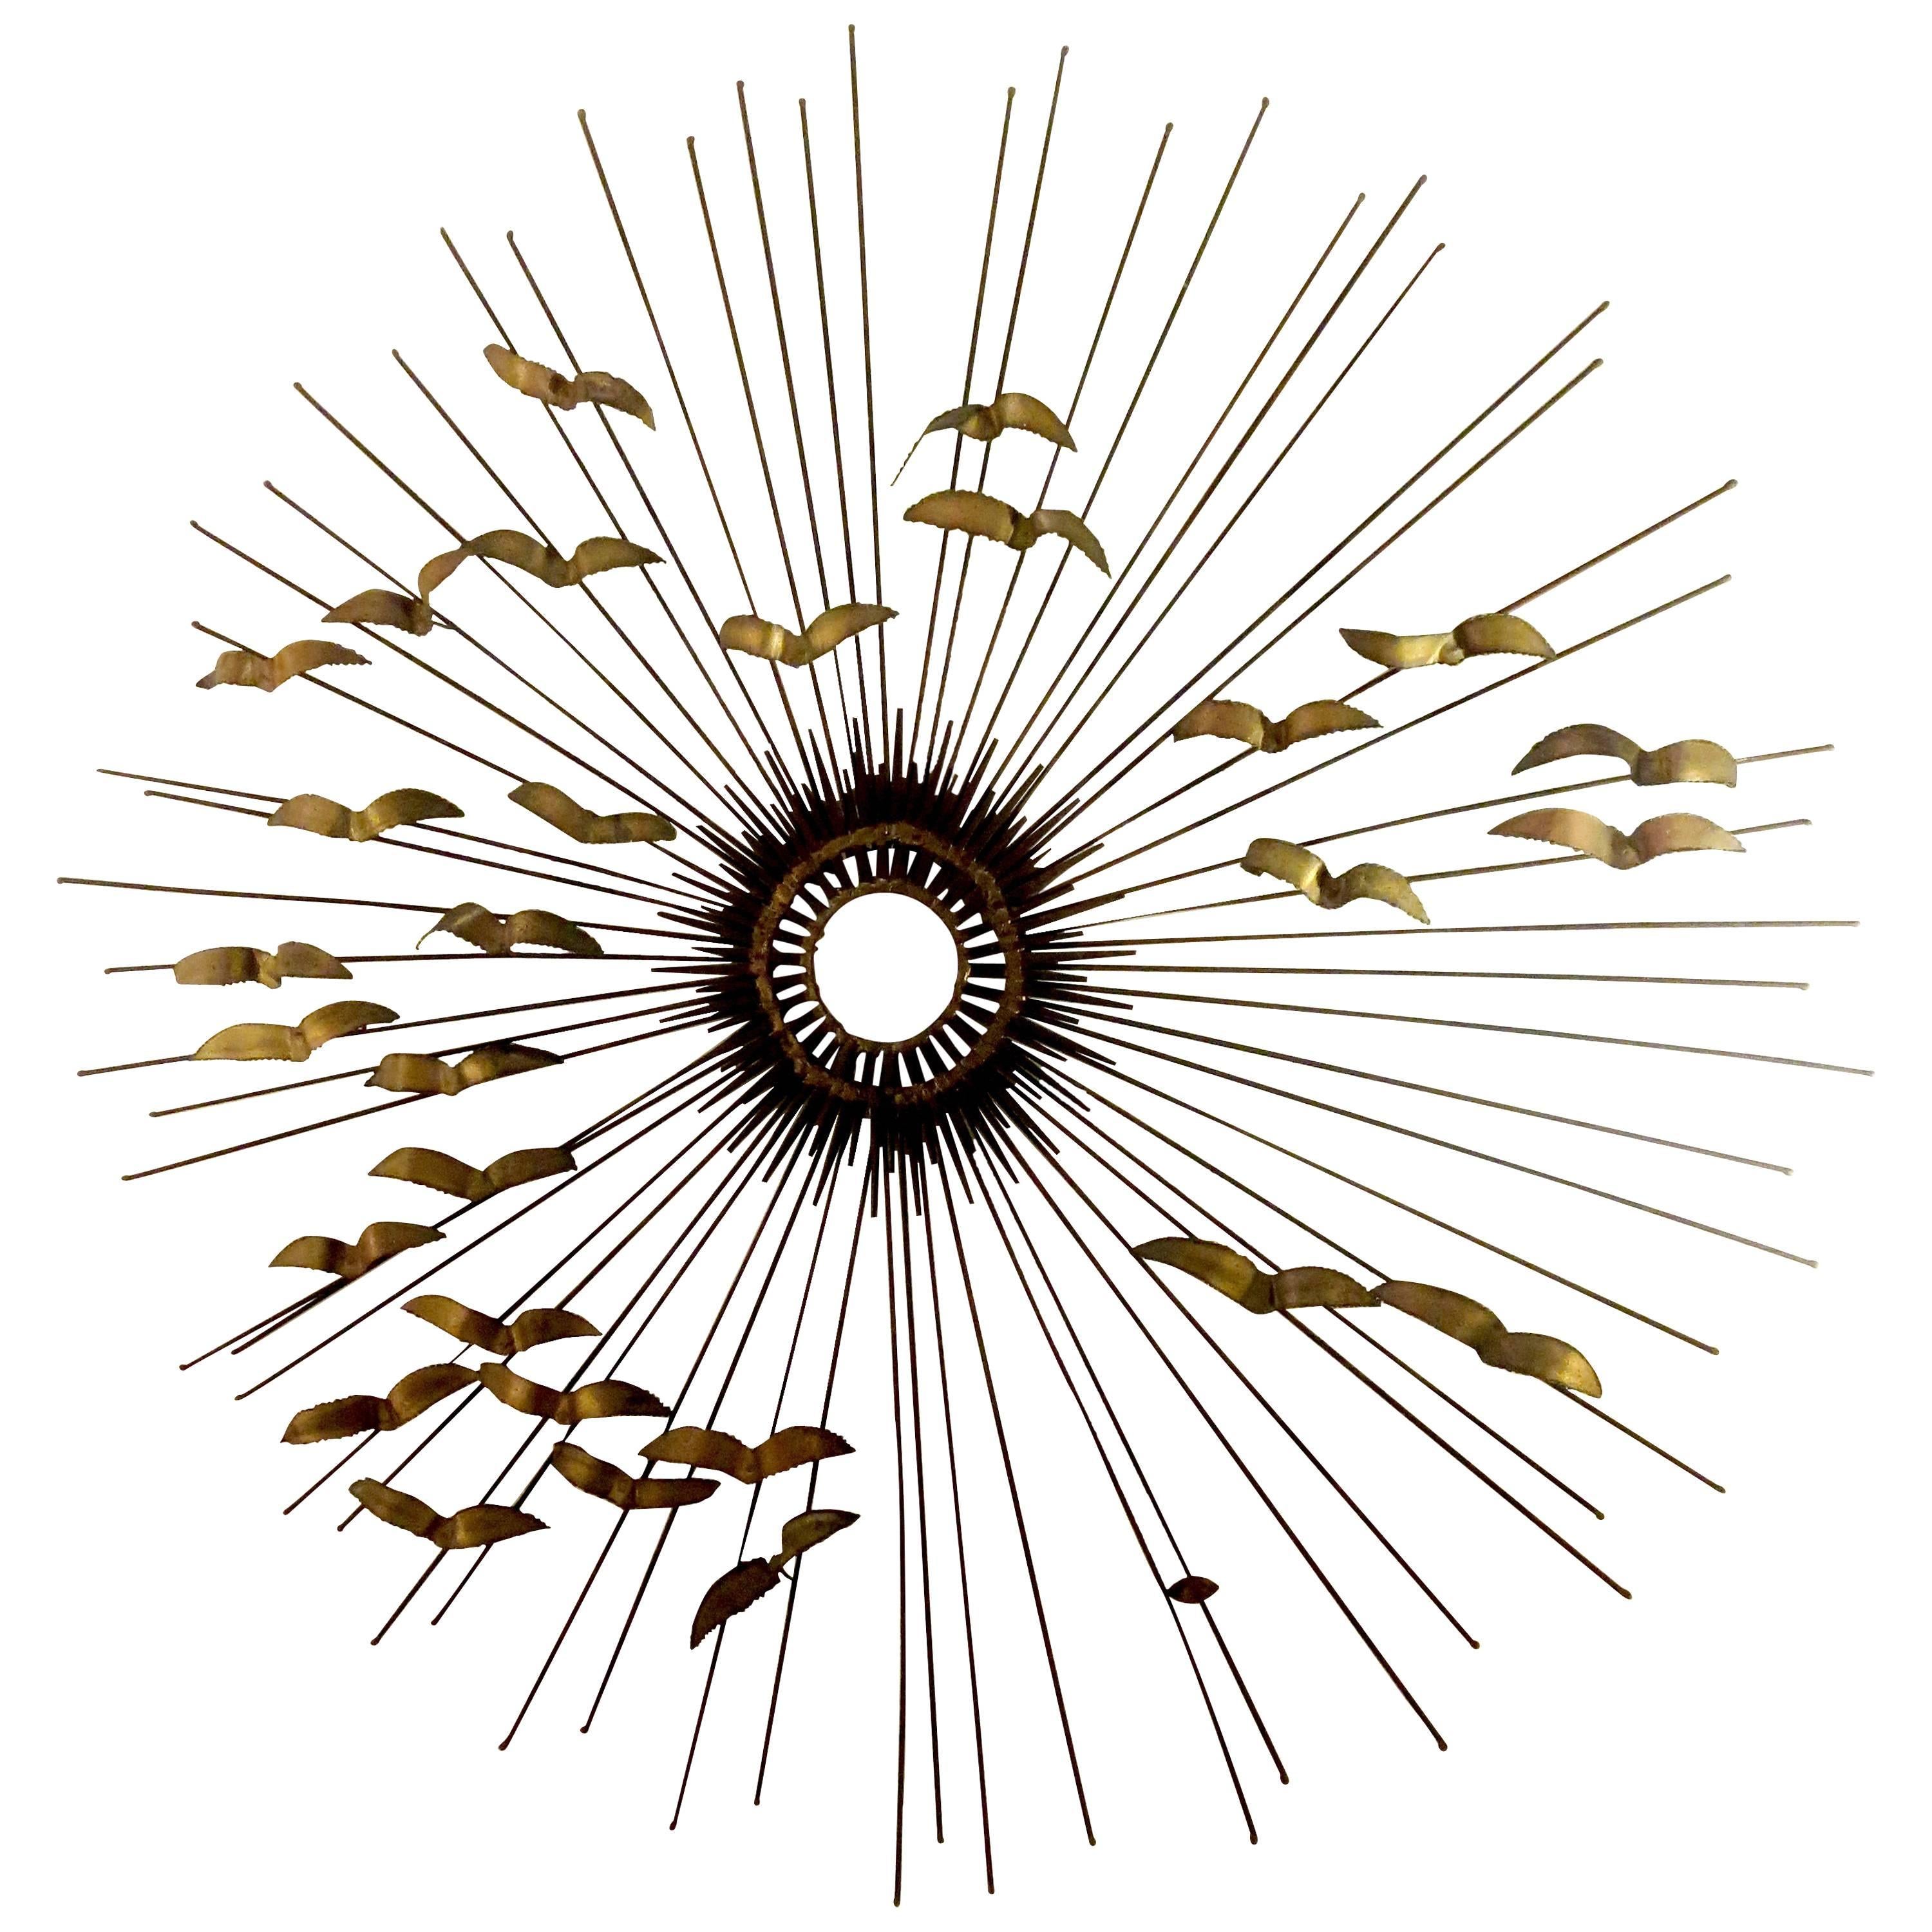 Stricking Large Sunburst Nails and Brass Welded Wall Hanging by Degroot